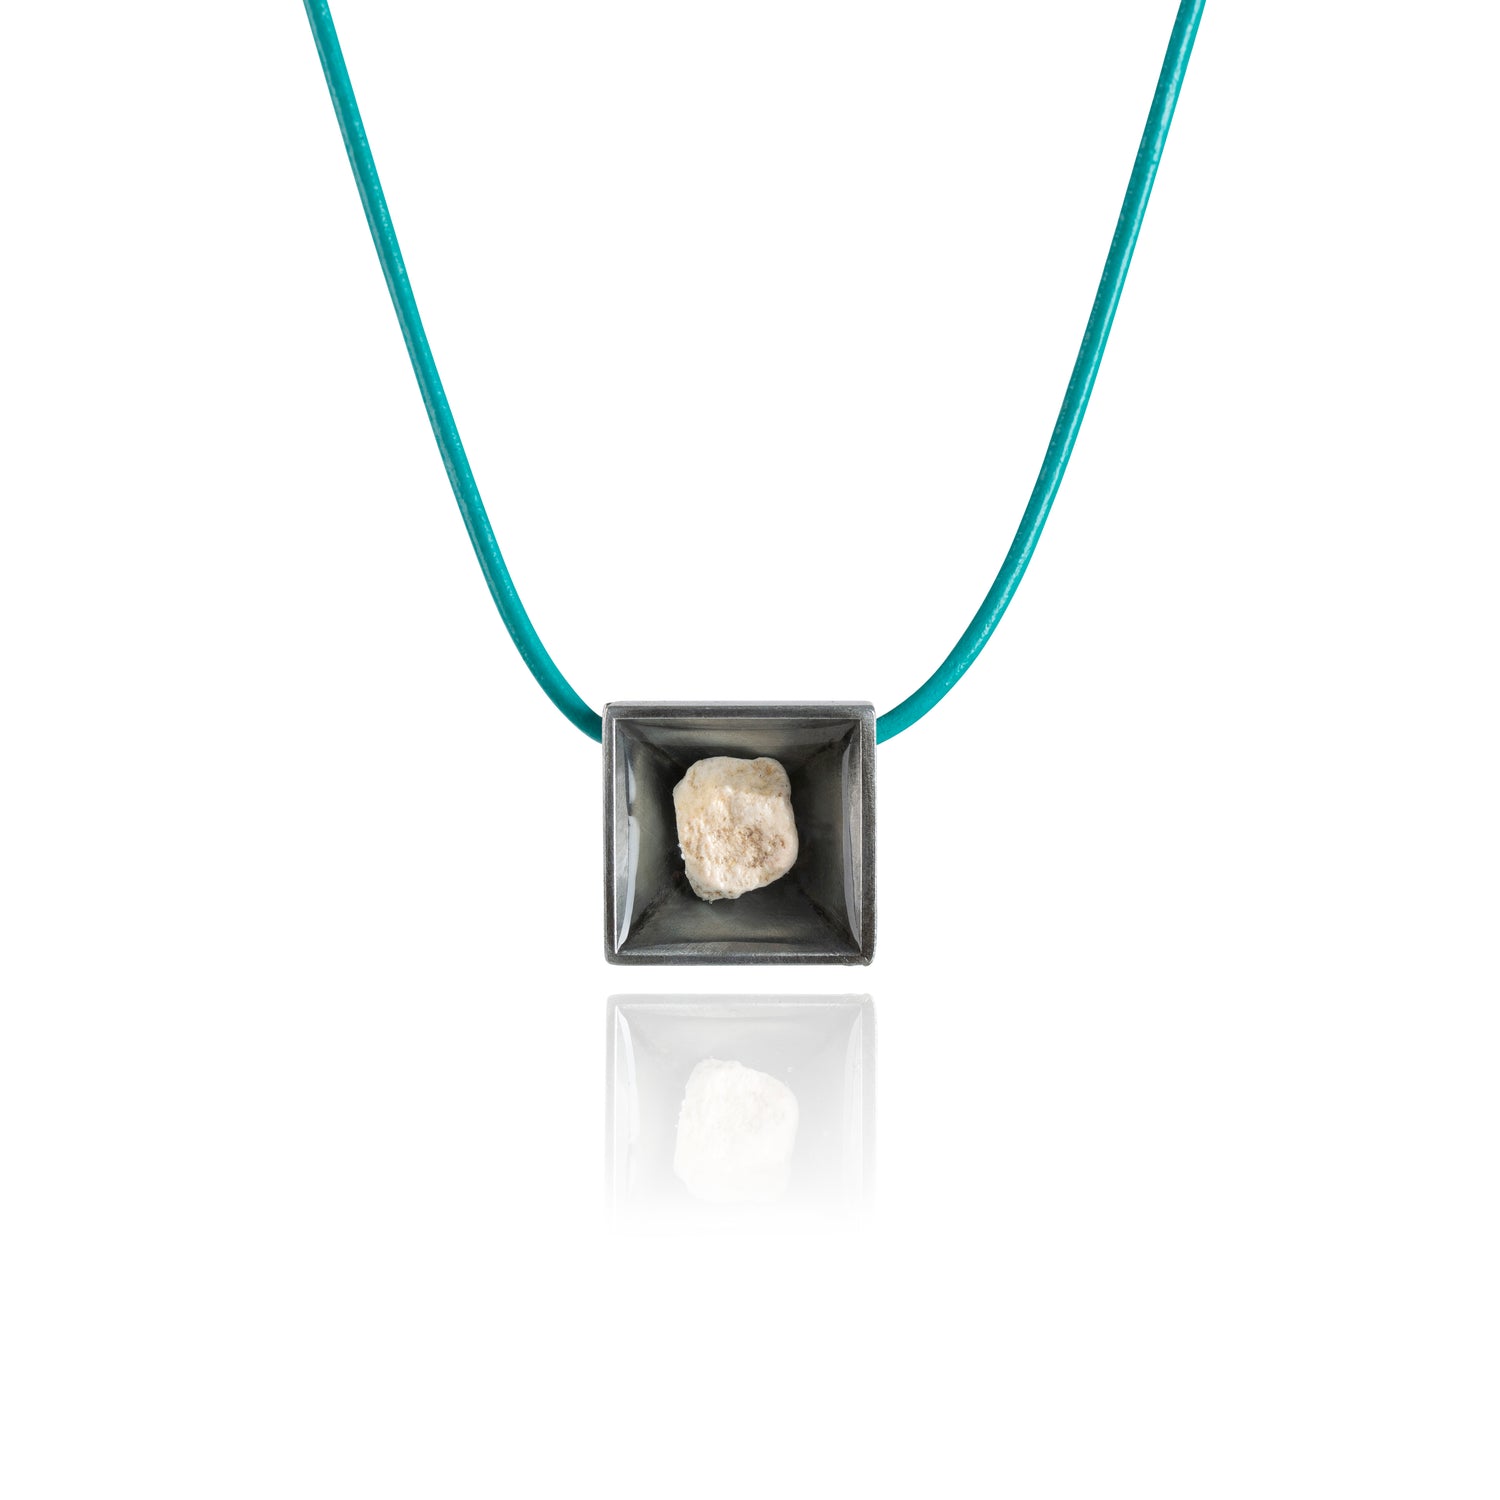 A small natural tan stone sitting in the middle of a square shaped metal pendant in a dark silver color. The pendant is hanging on a turquoise leather necklace.